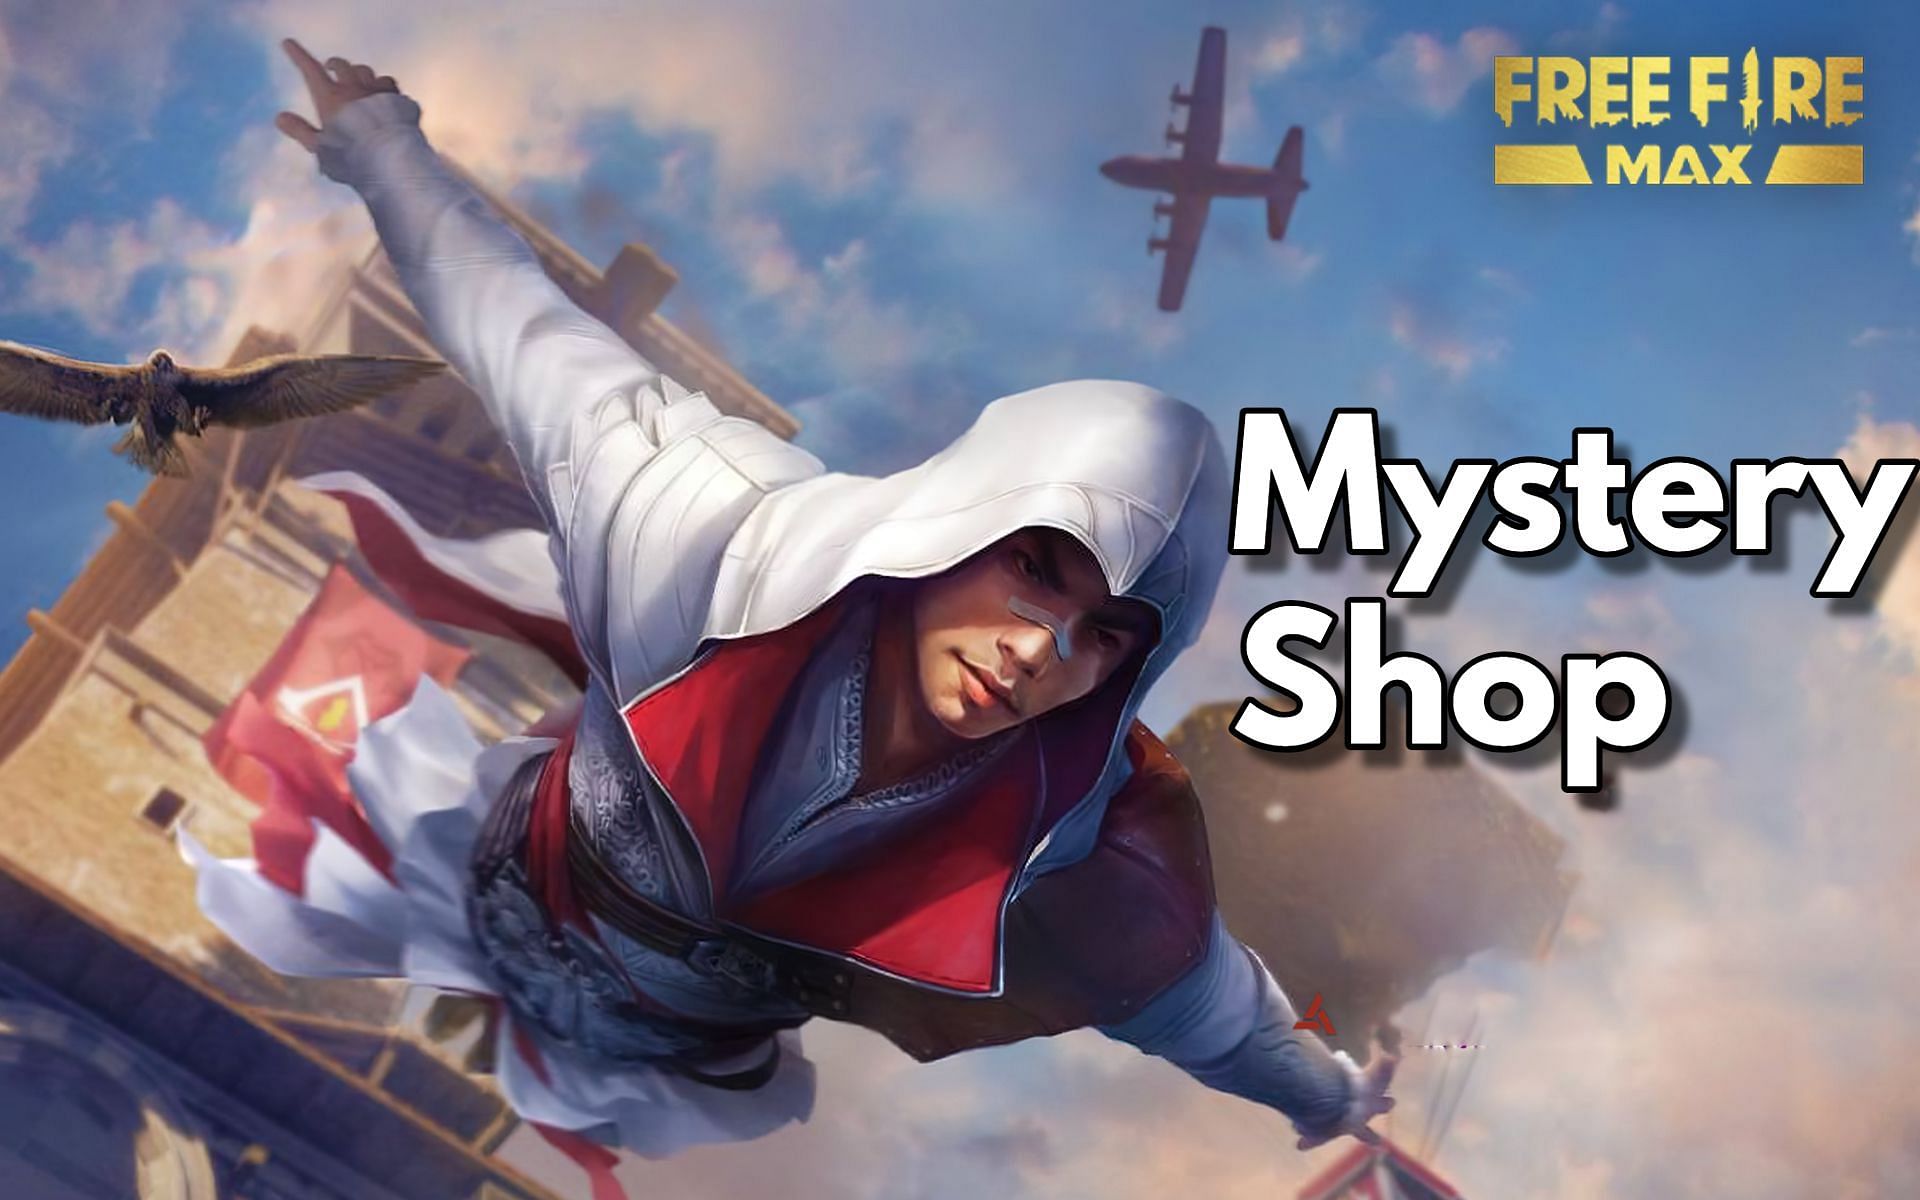 Mystery Shop has started in Free Fire MAX (Image via Sportskeeda)